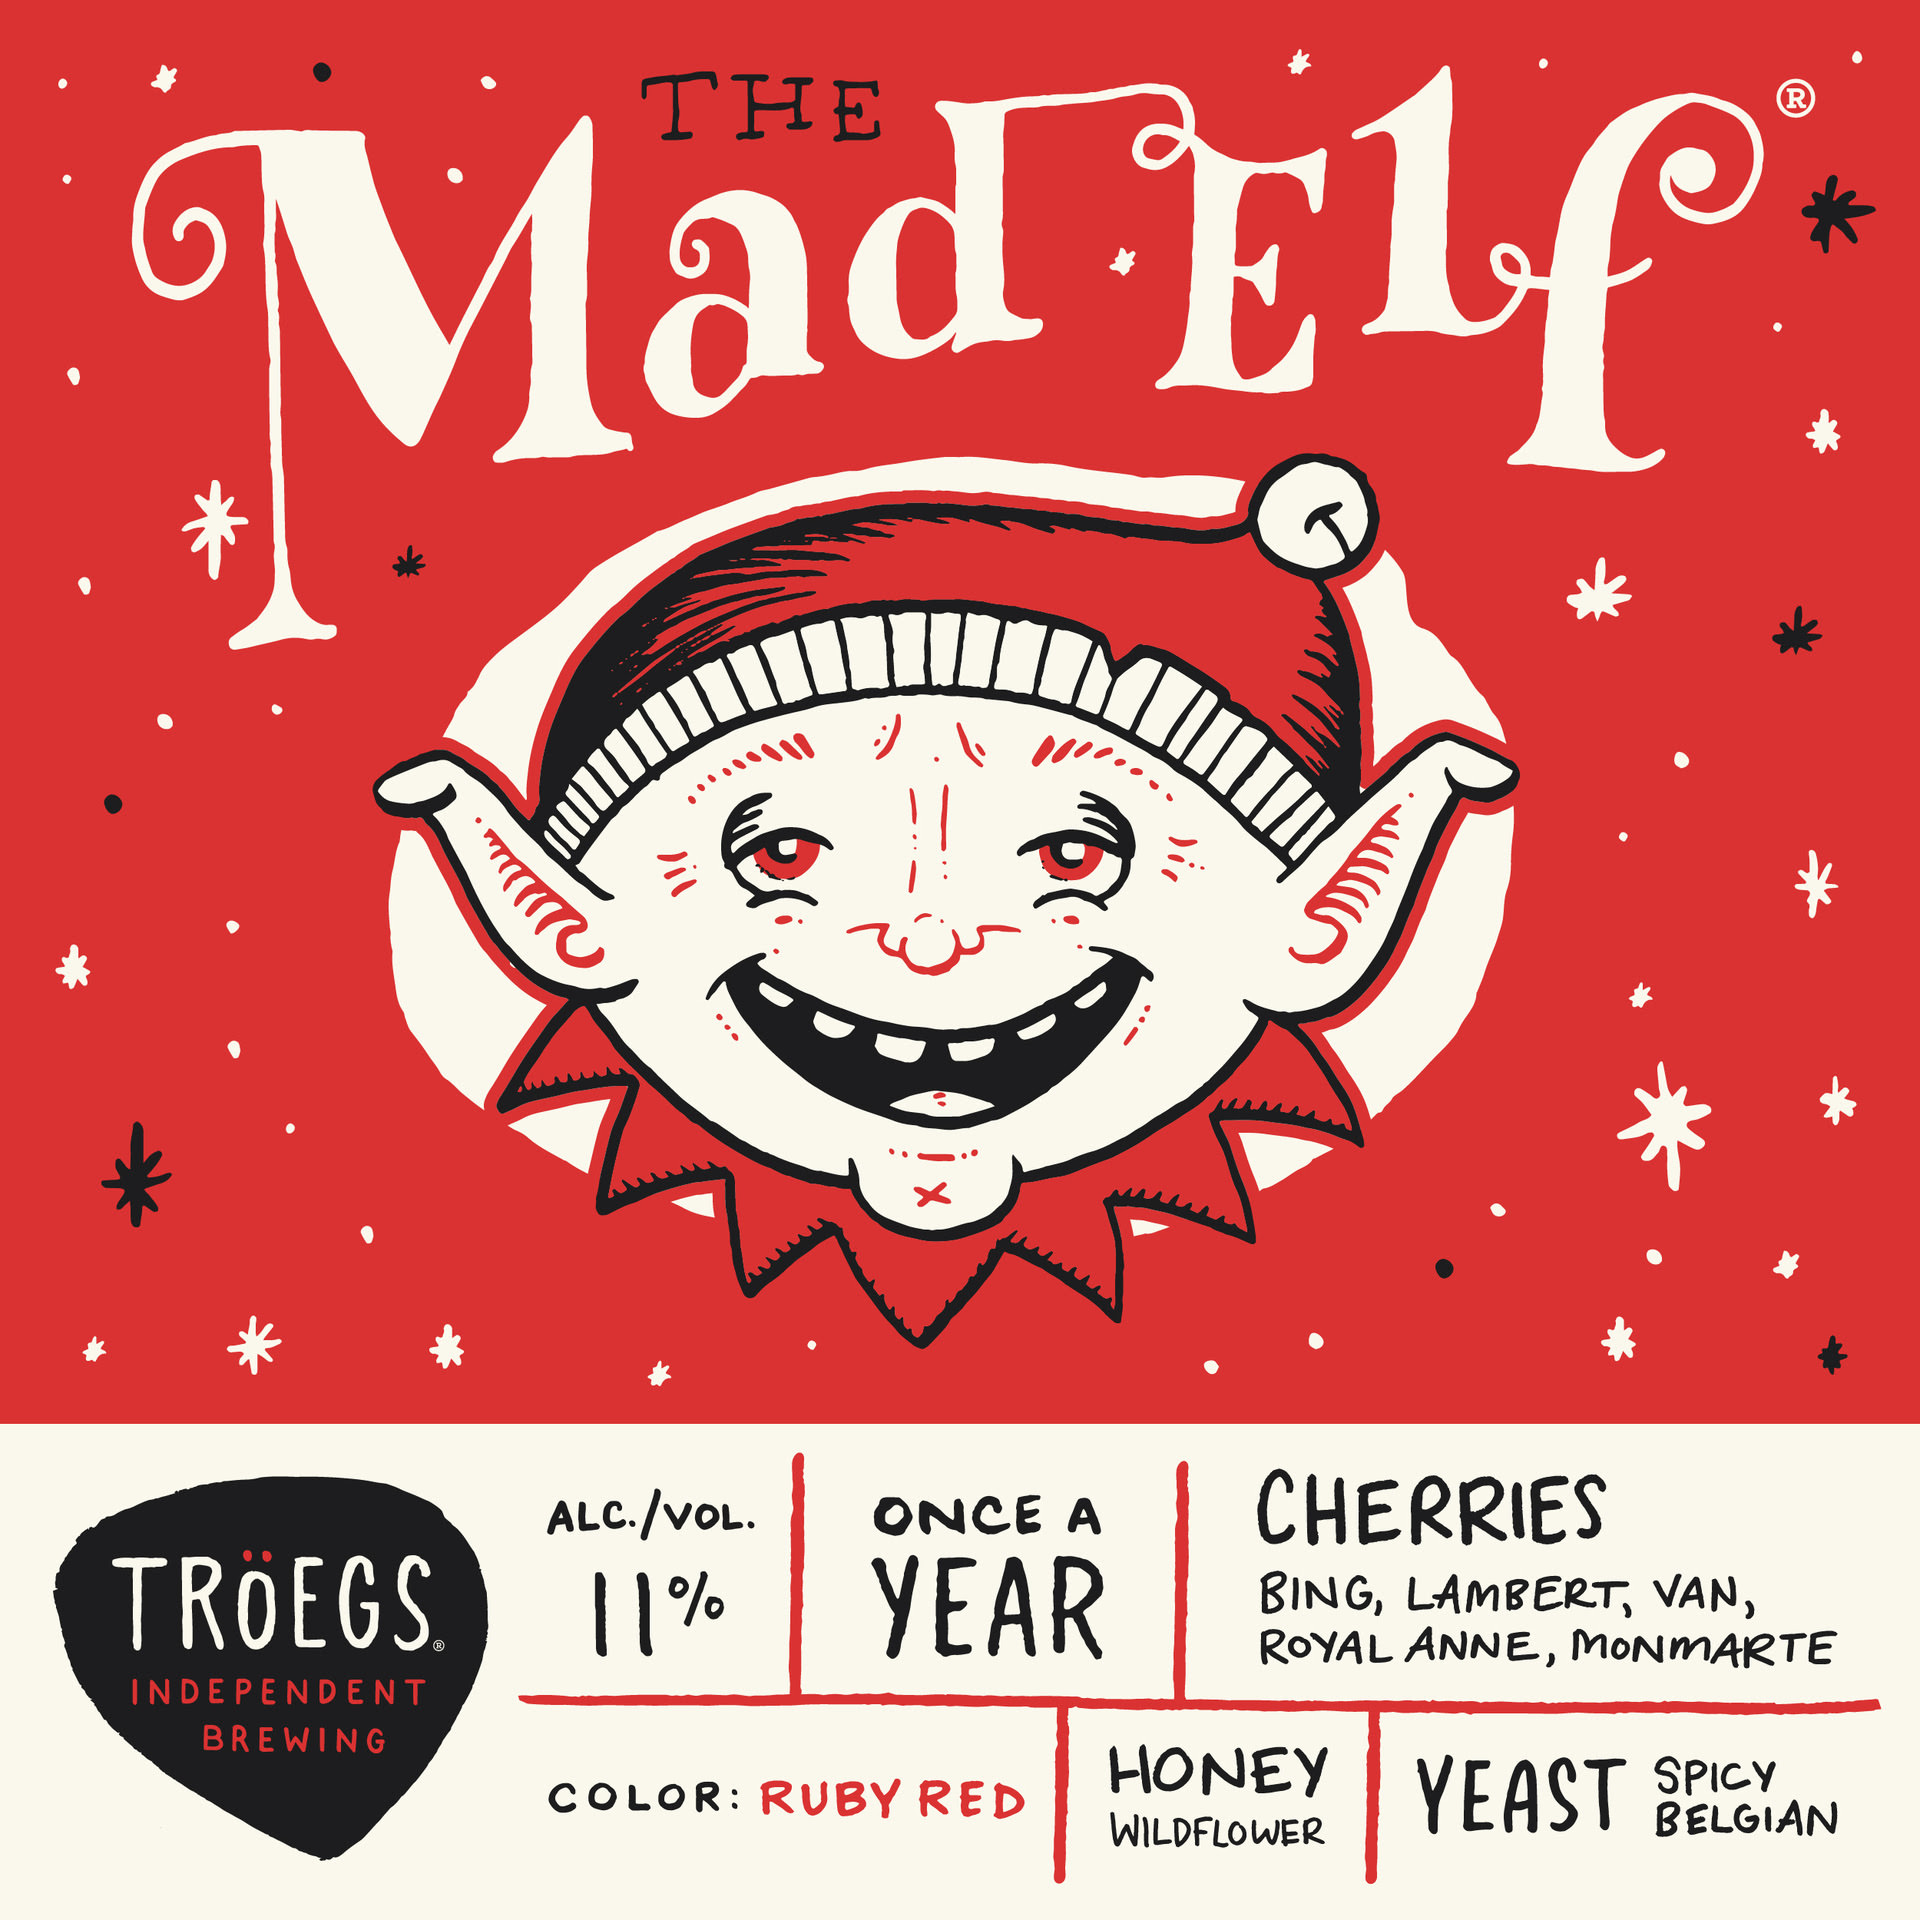 The Mad Elf at The Stones Throw